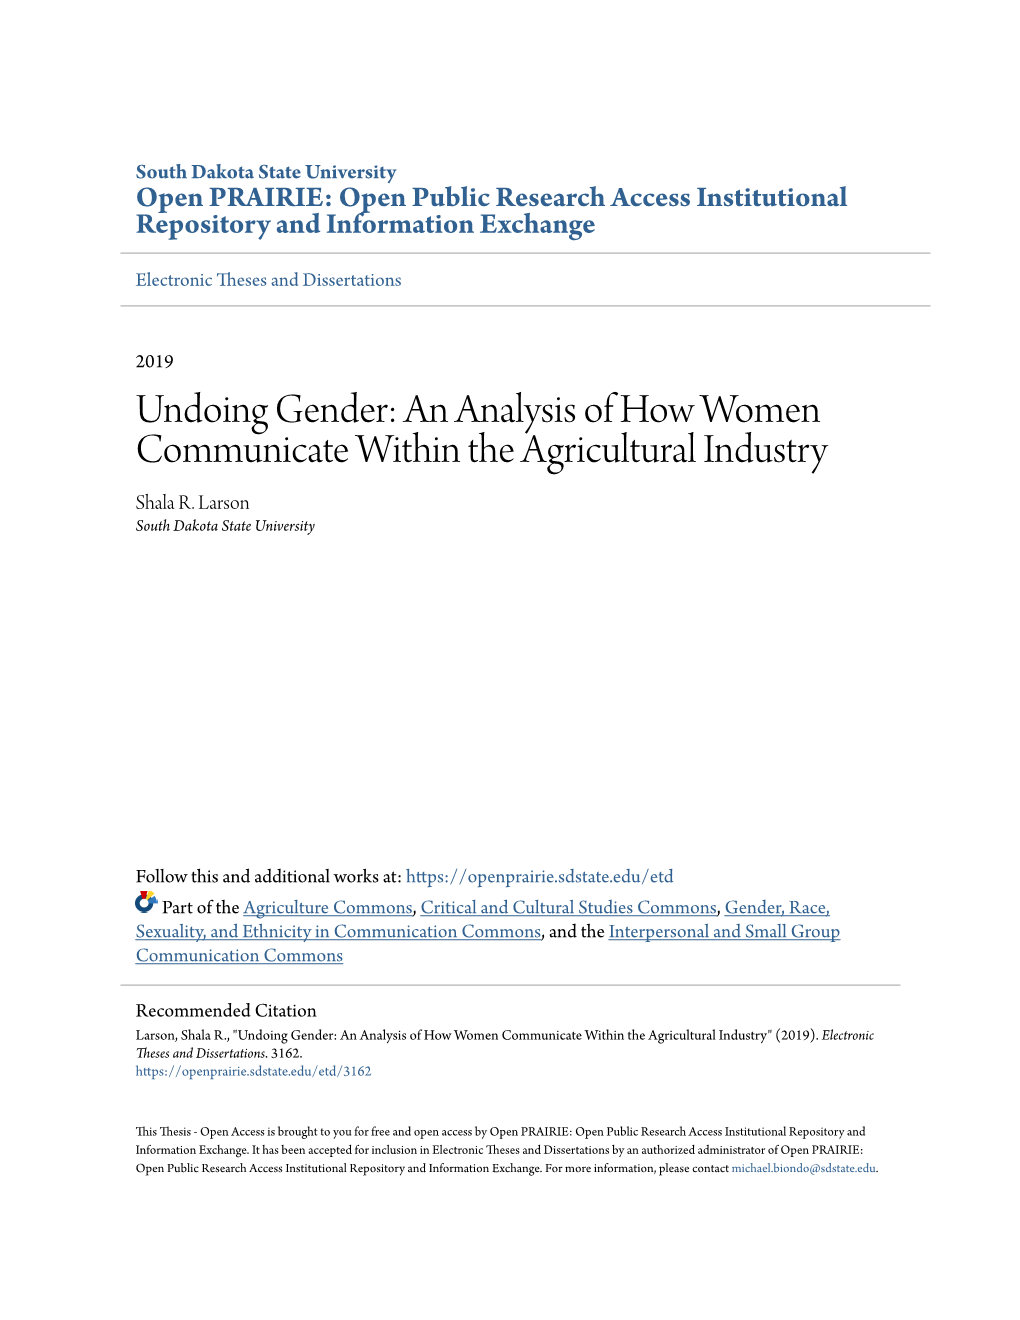 Undoing Gender: an Analysis of How Women Communicate Within the Agricultural Industry Shala R